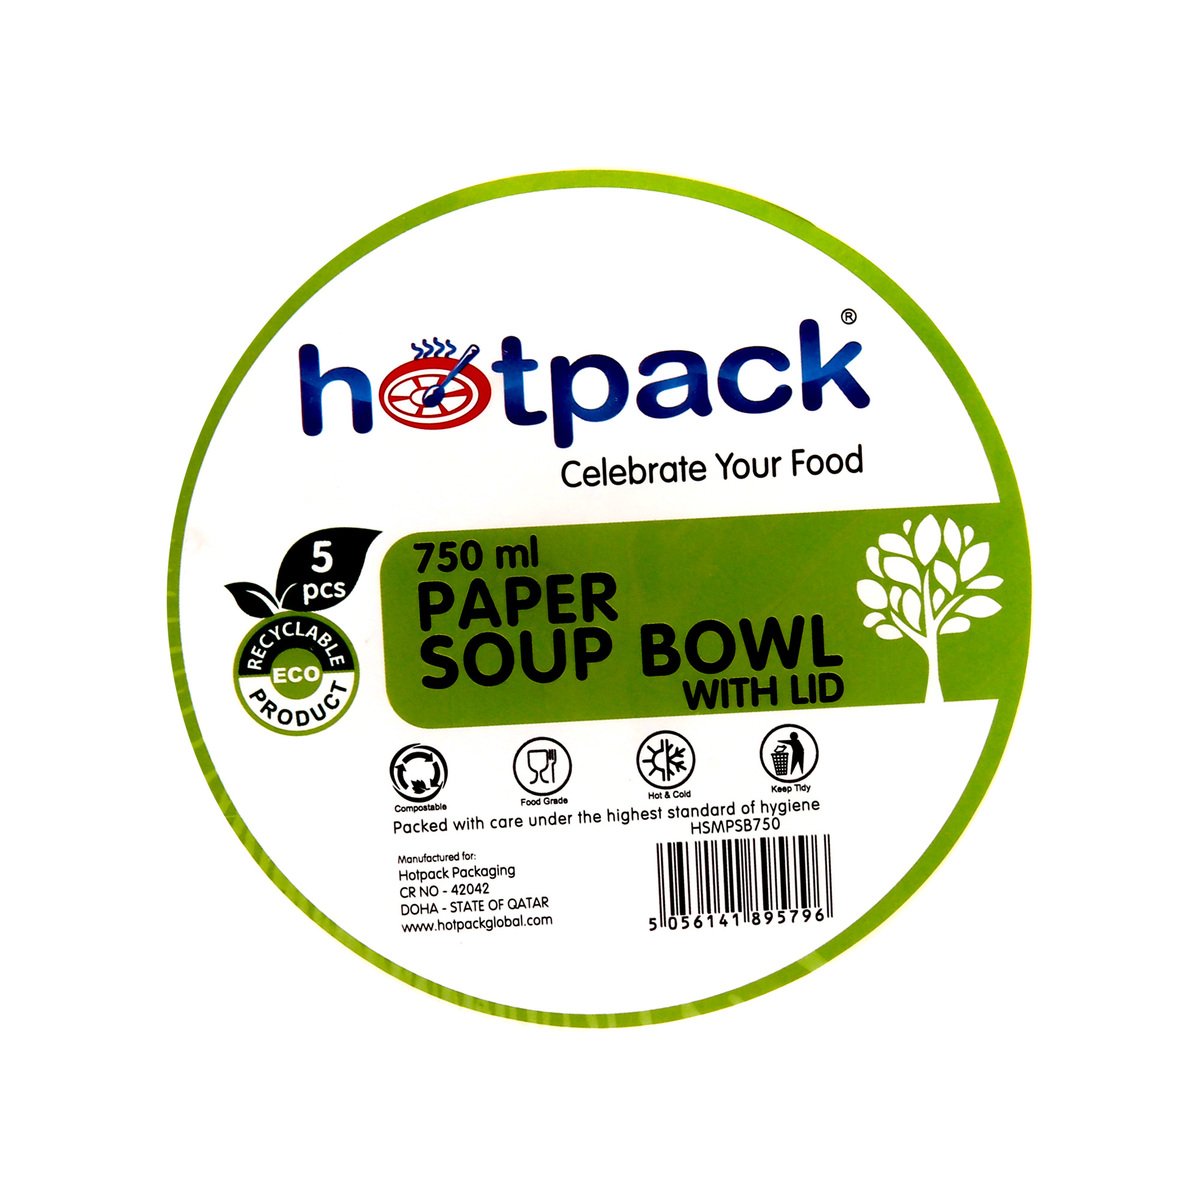 Hotpack Paper Soup Bowl with LID 750ml 5pcs